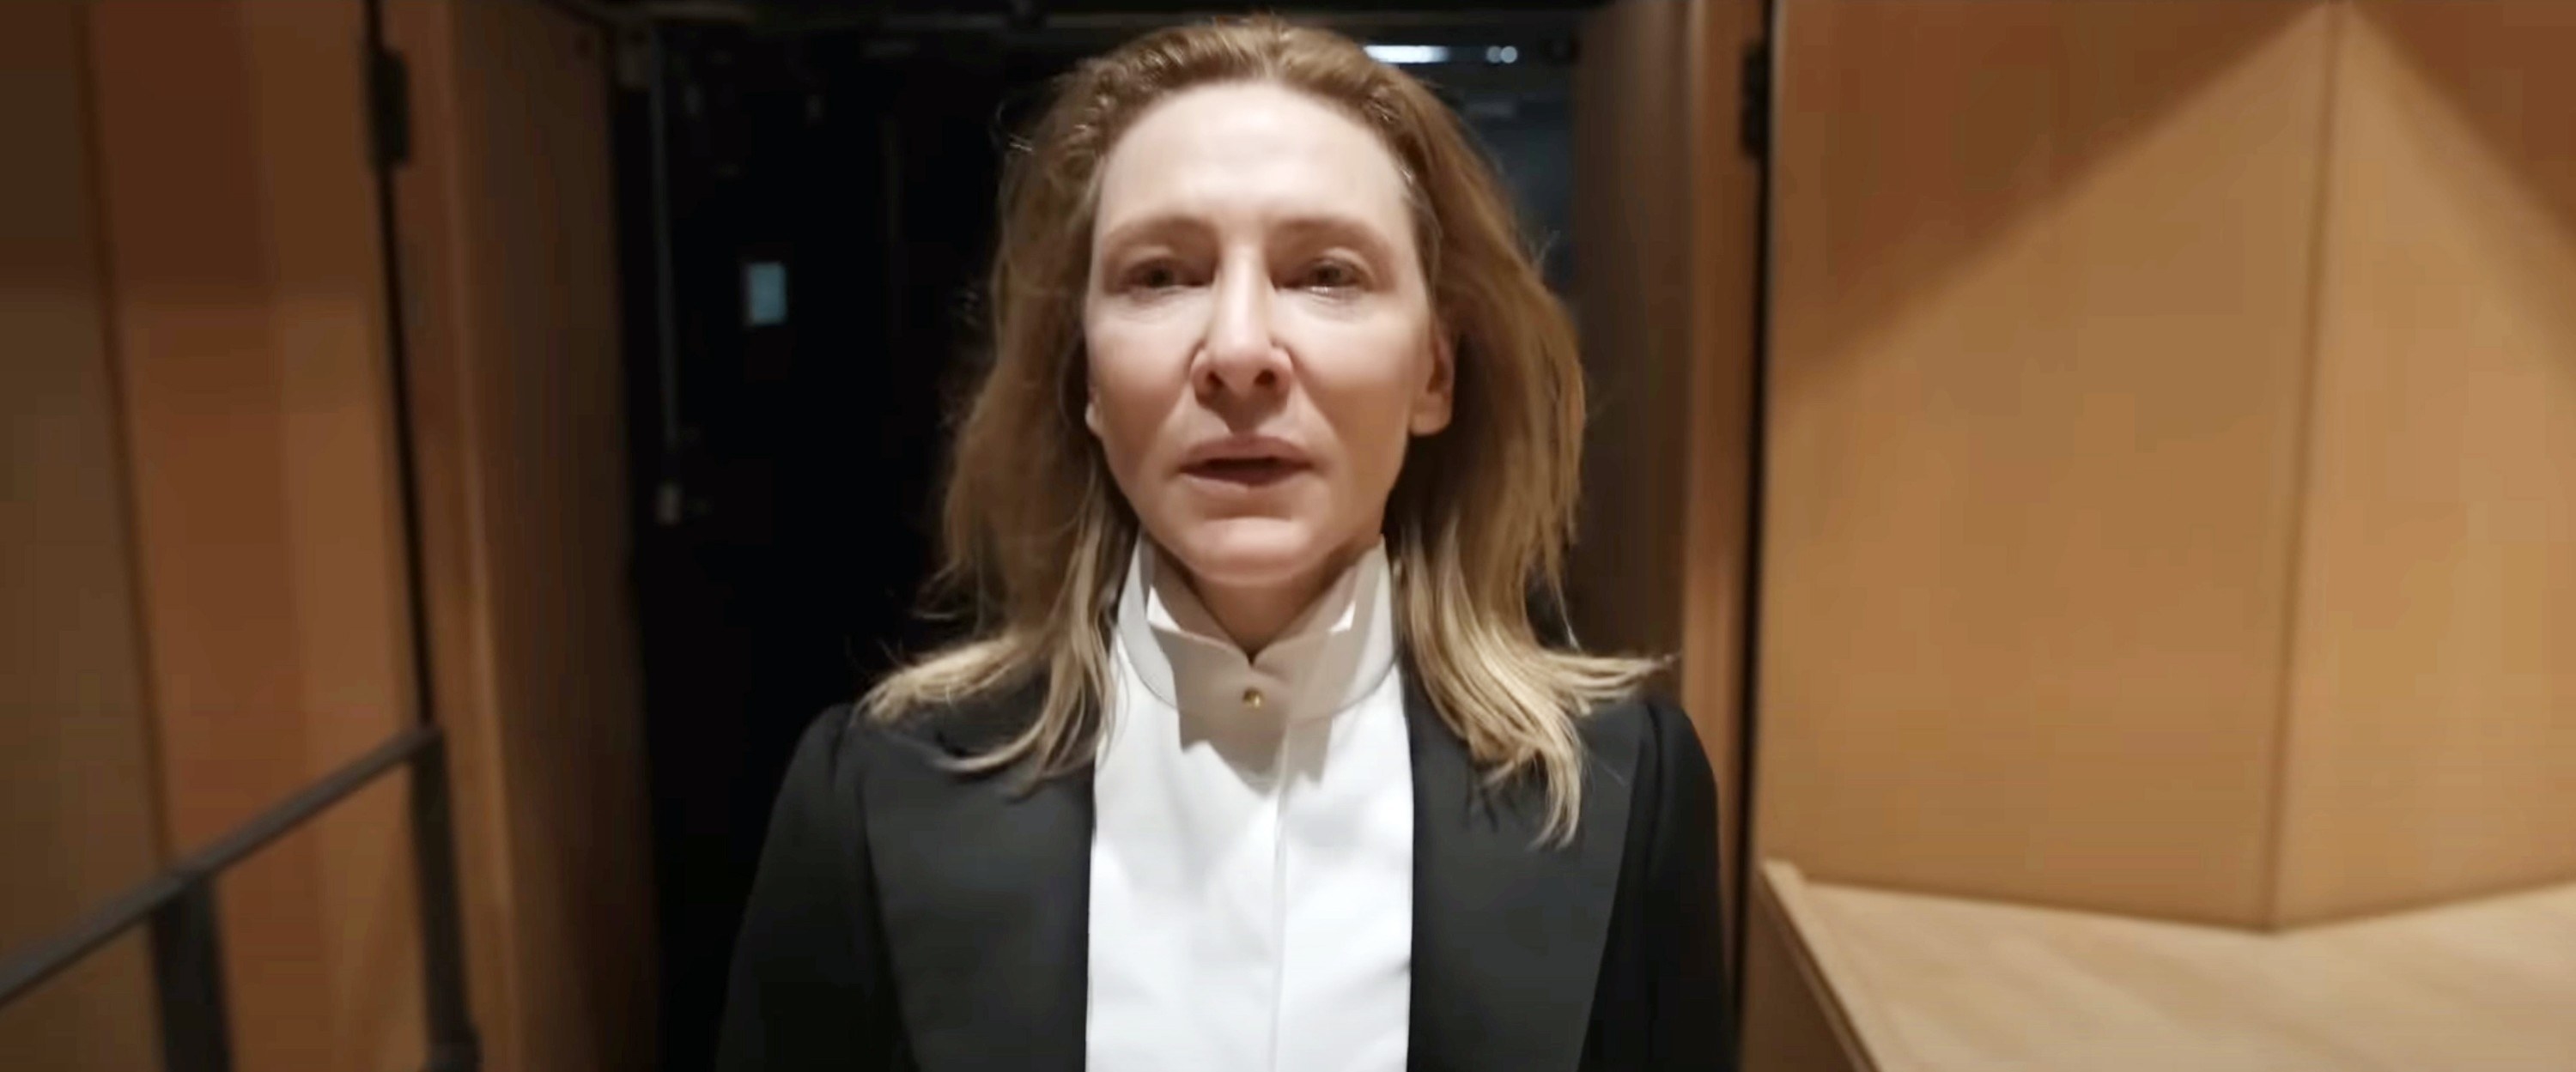 Cate Blanchette stands in a tux backstage